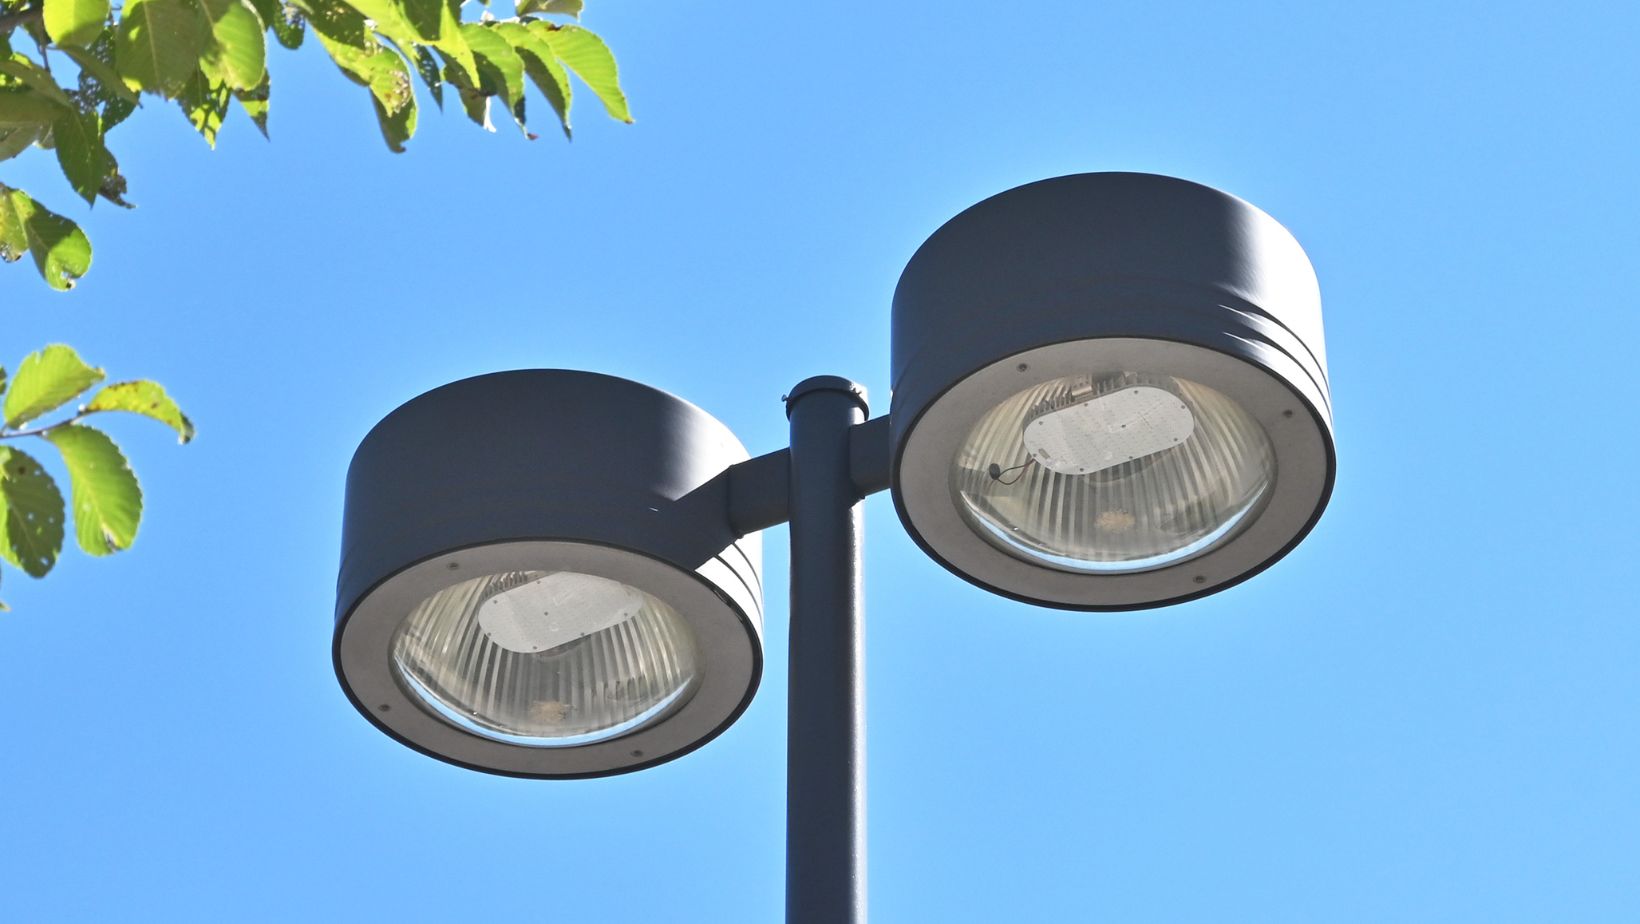 The Many Different Uses and Applications of LED Floodlights